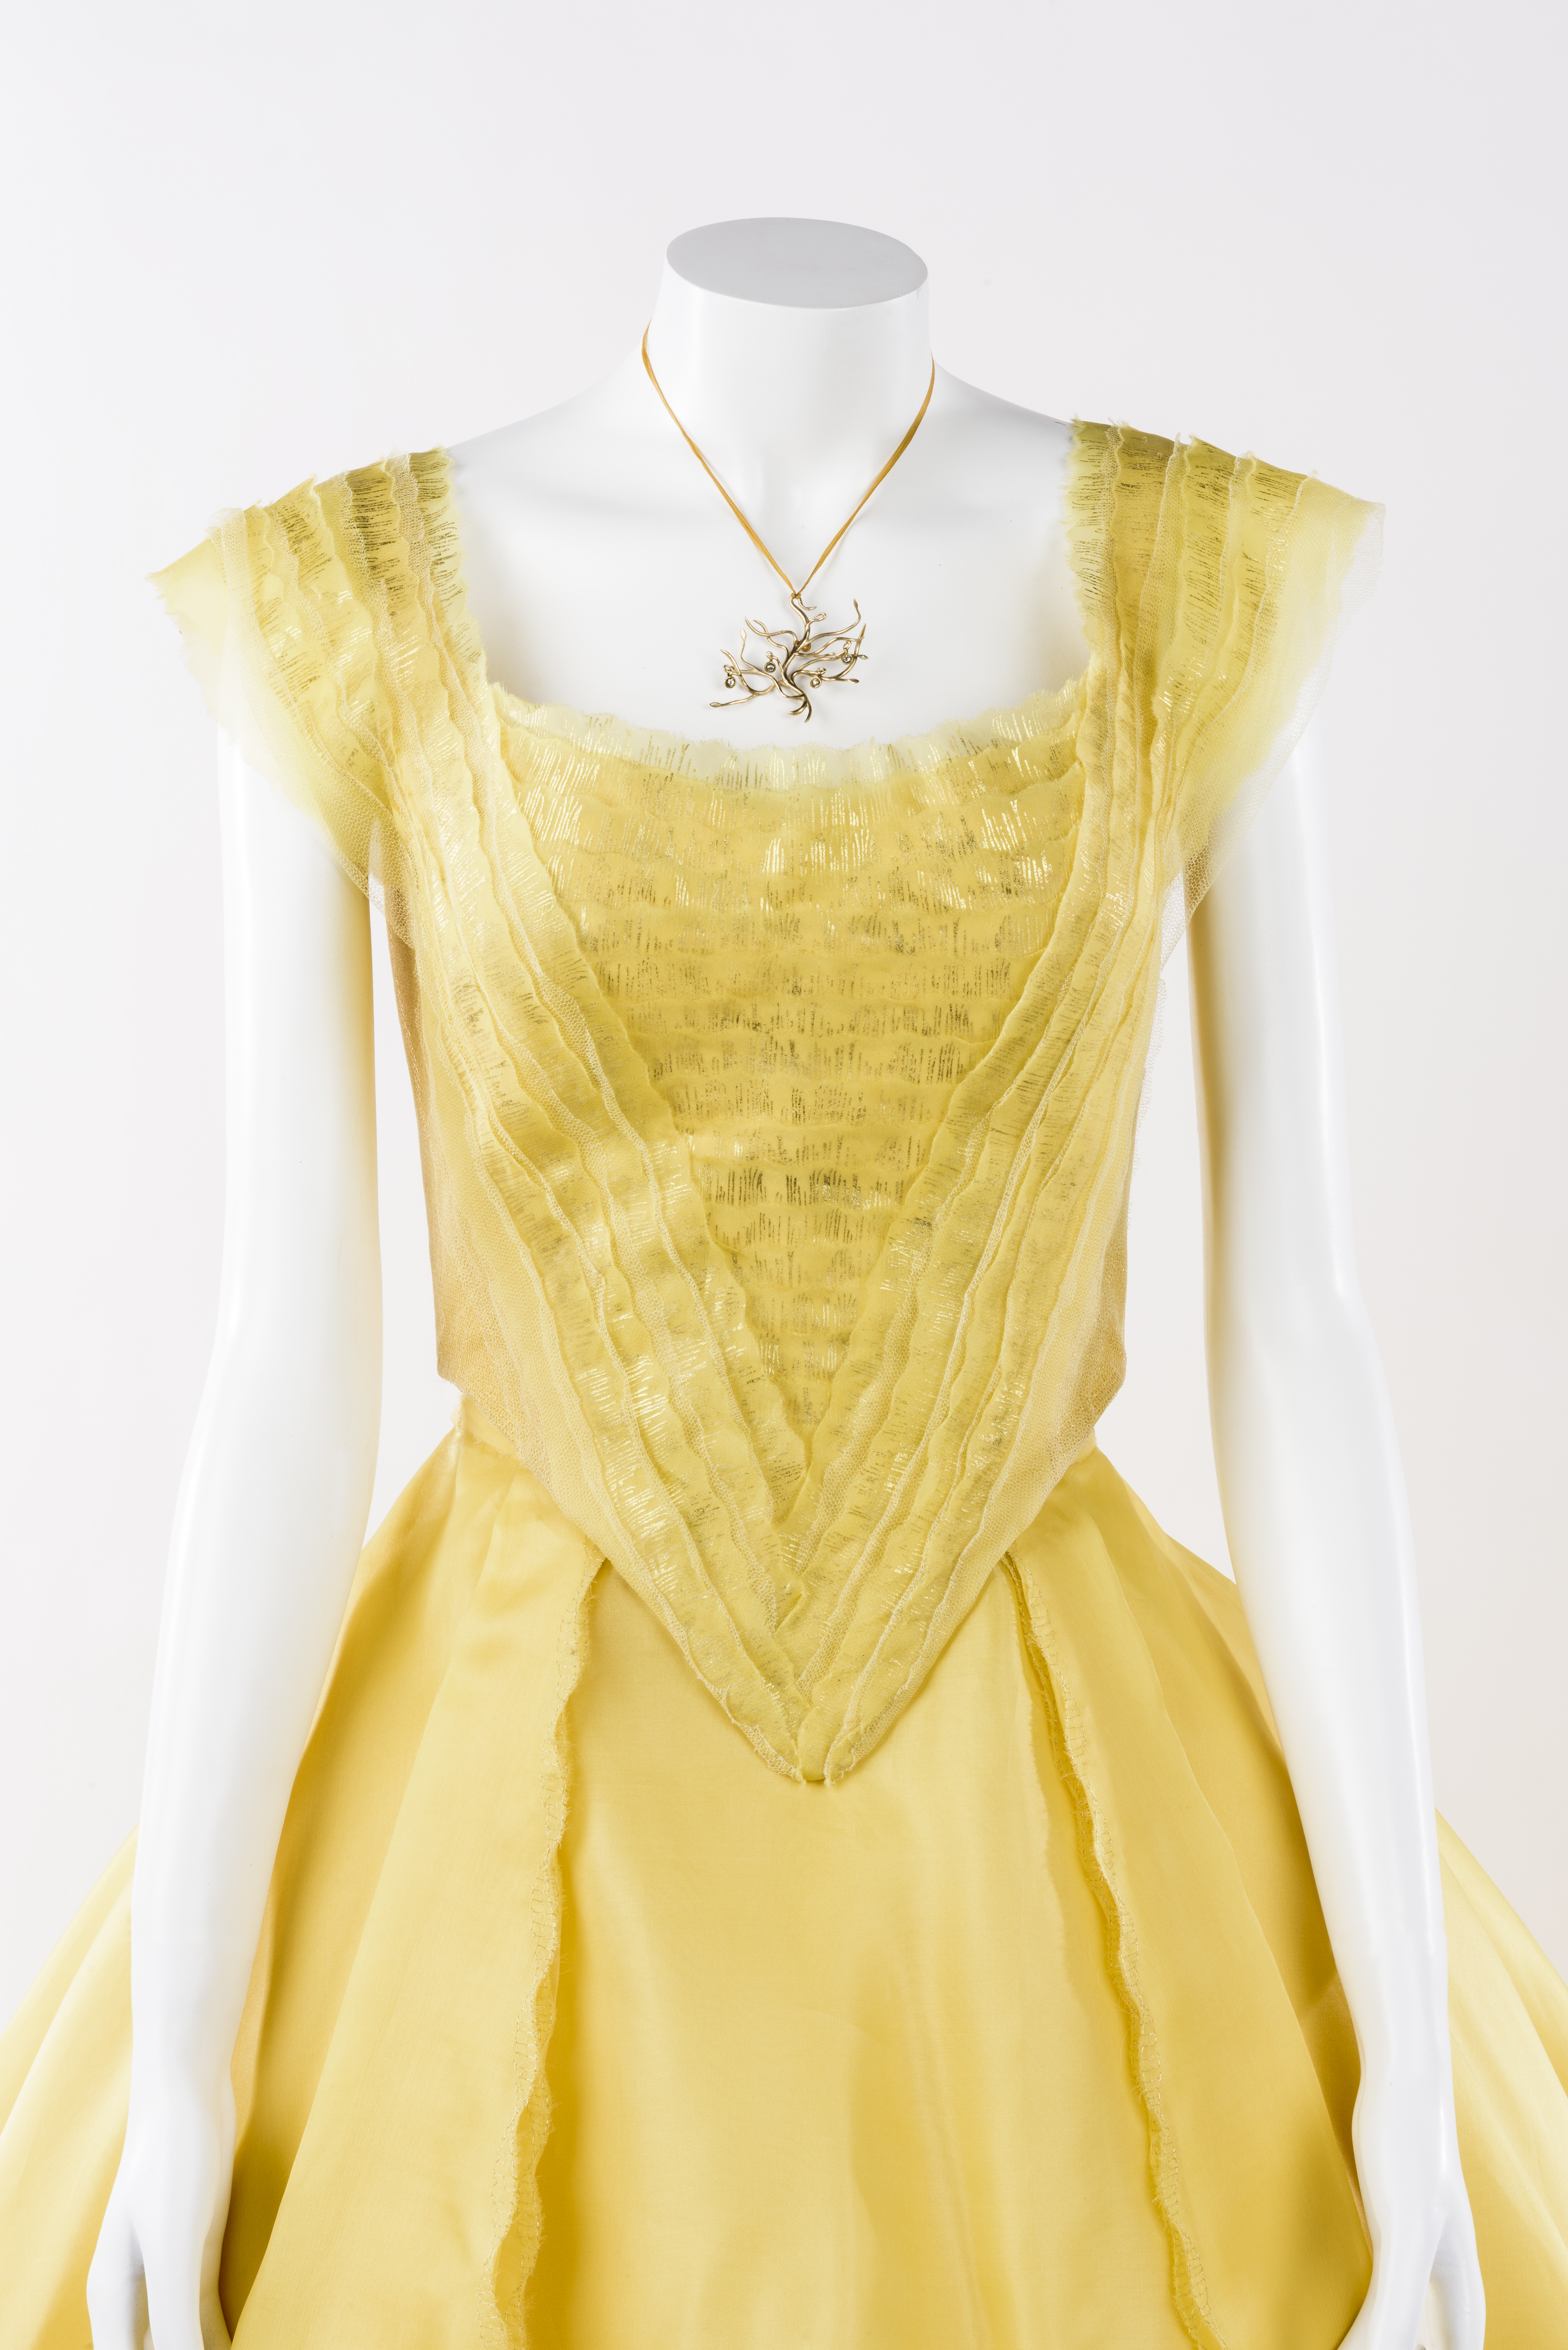 Yellow ball gown worn by Emma Watson as Belle in the 2017 live-action version of ‘Beauty and the Beast.’ Courtesy of The Henry Ford